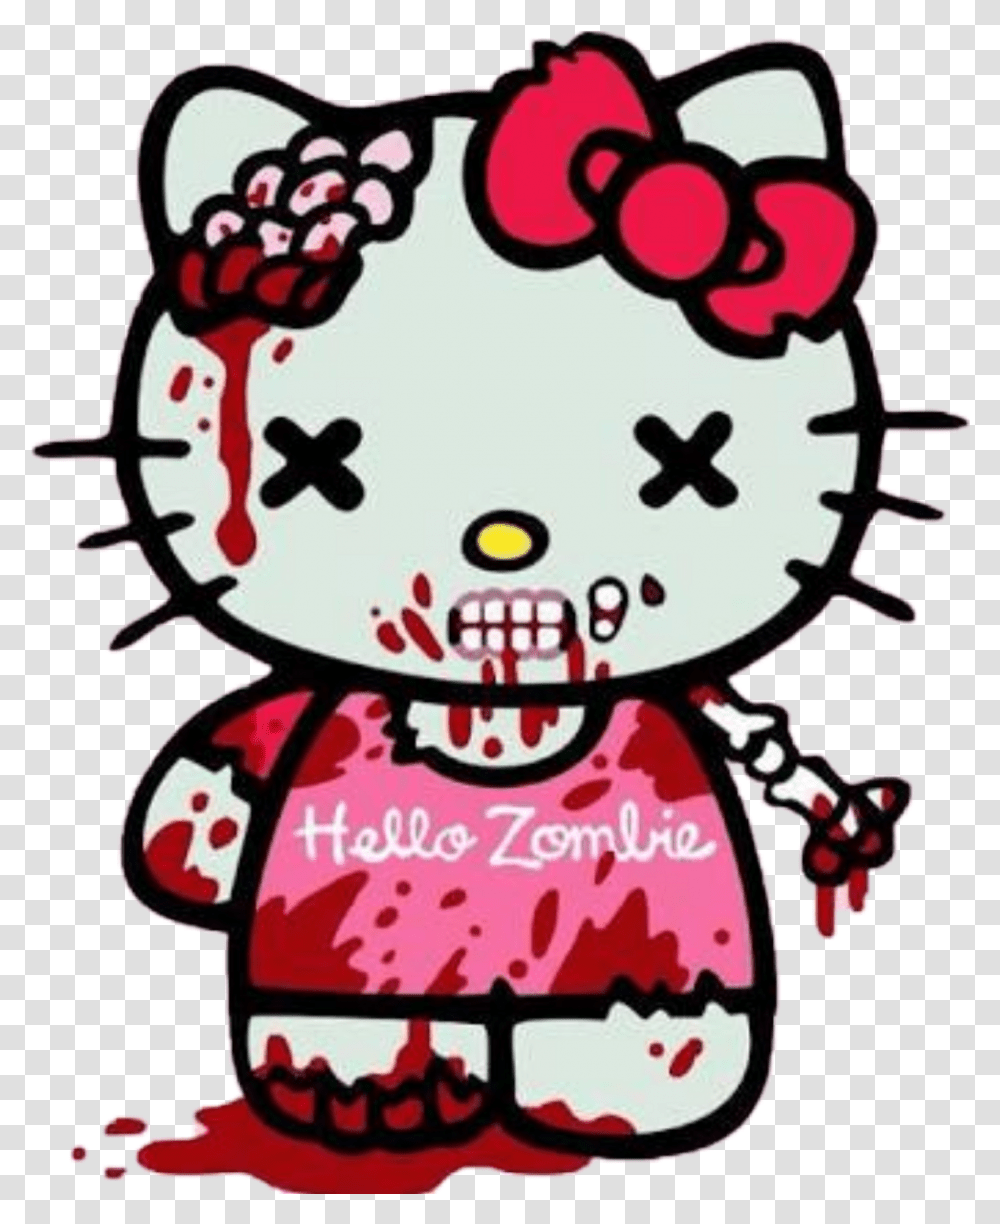 Zombie Clipart Hello Kitty Hello Kitty Love You Hello Kitty Zombie, Label, Text, Sticker, Doodle Transparent Png